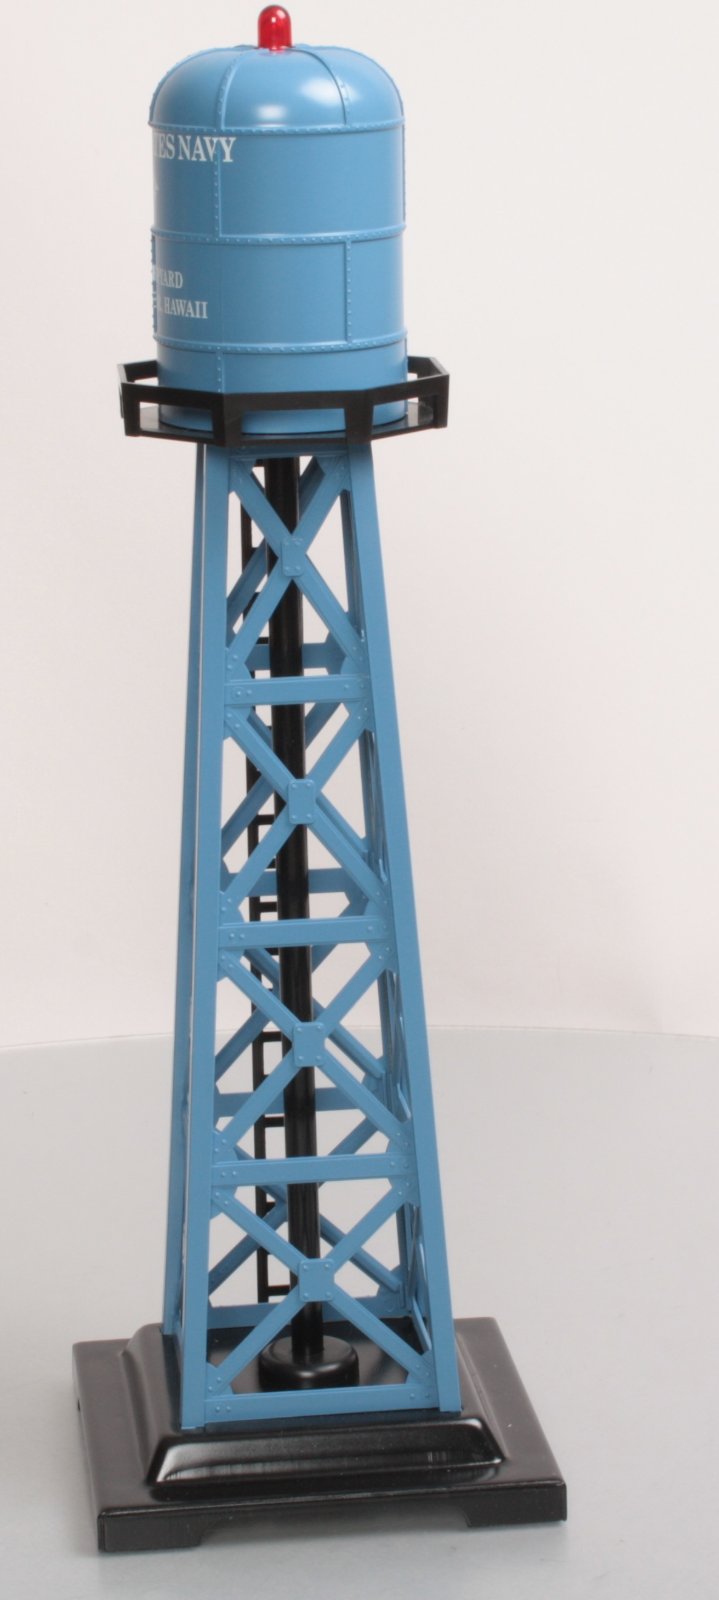 O-Line 709 US Navy Lighted Water Tower